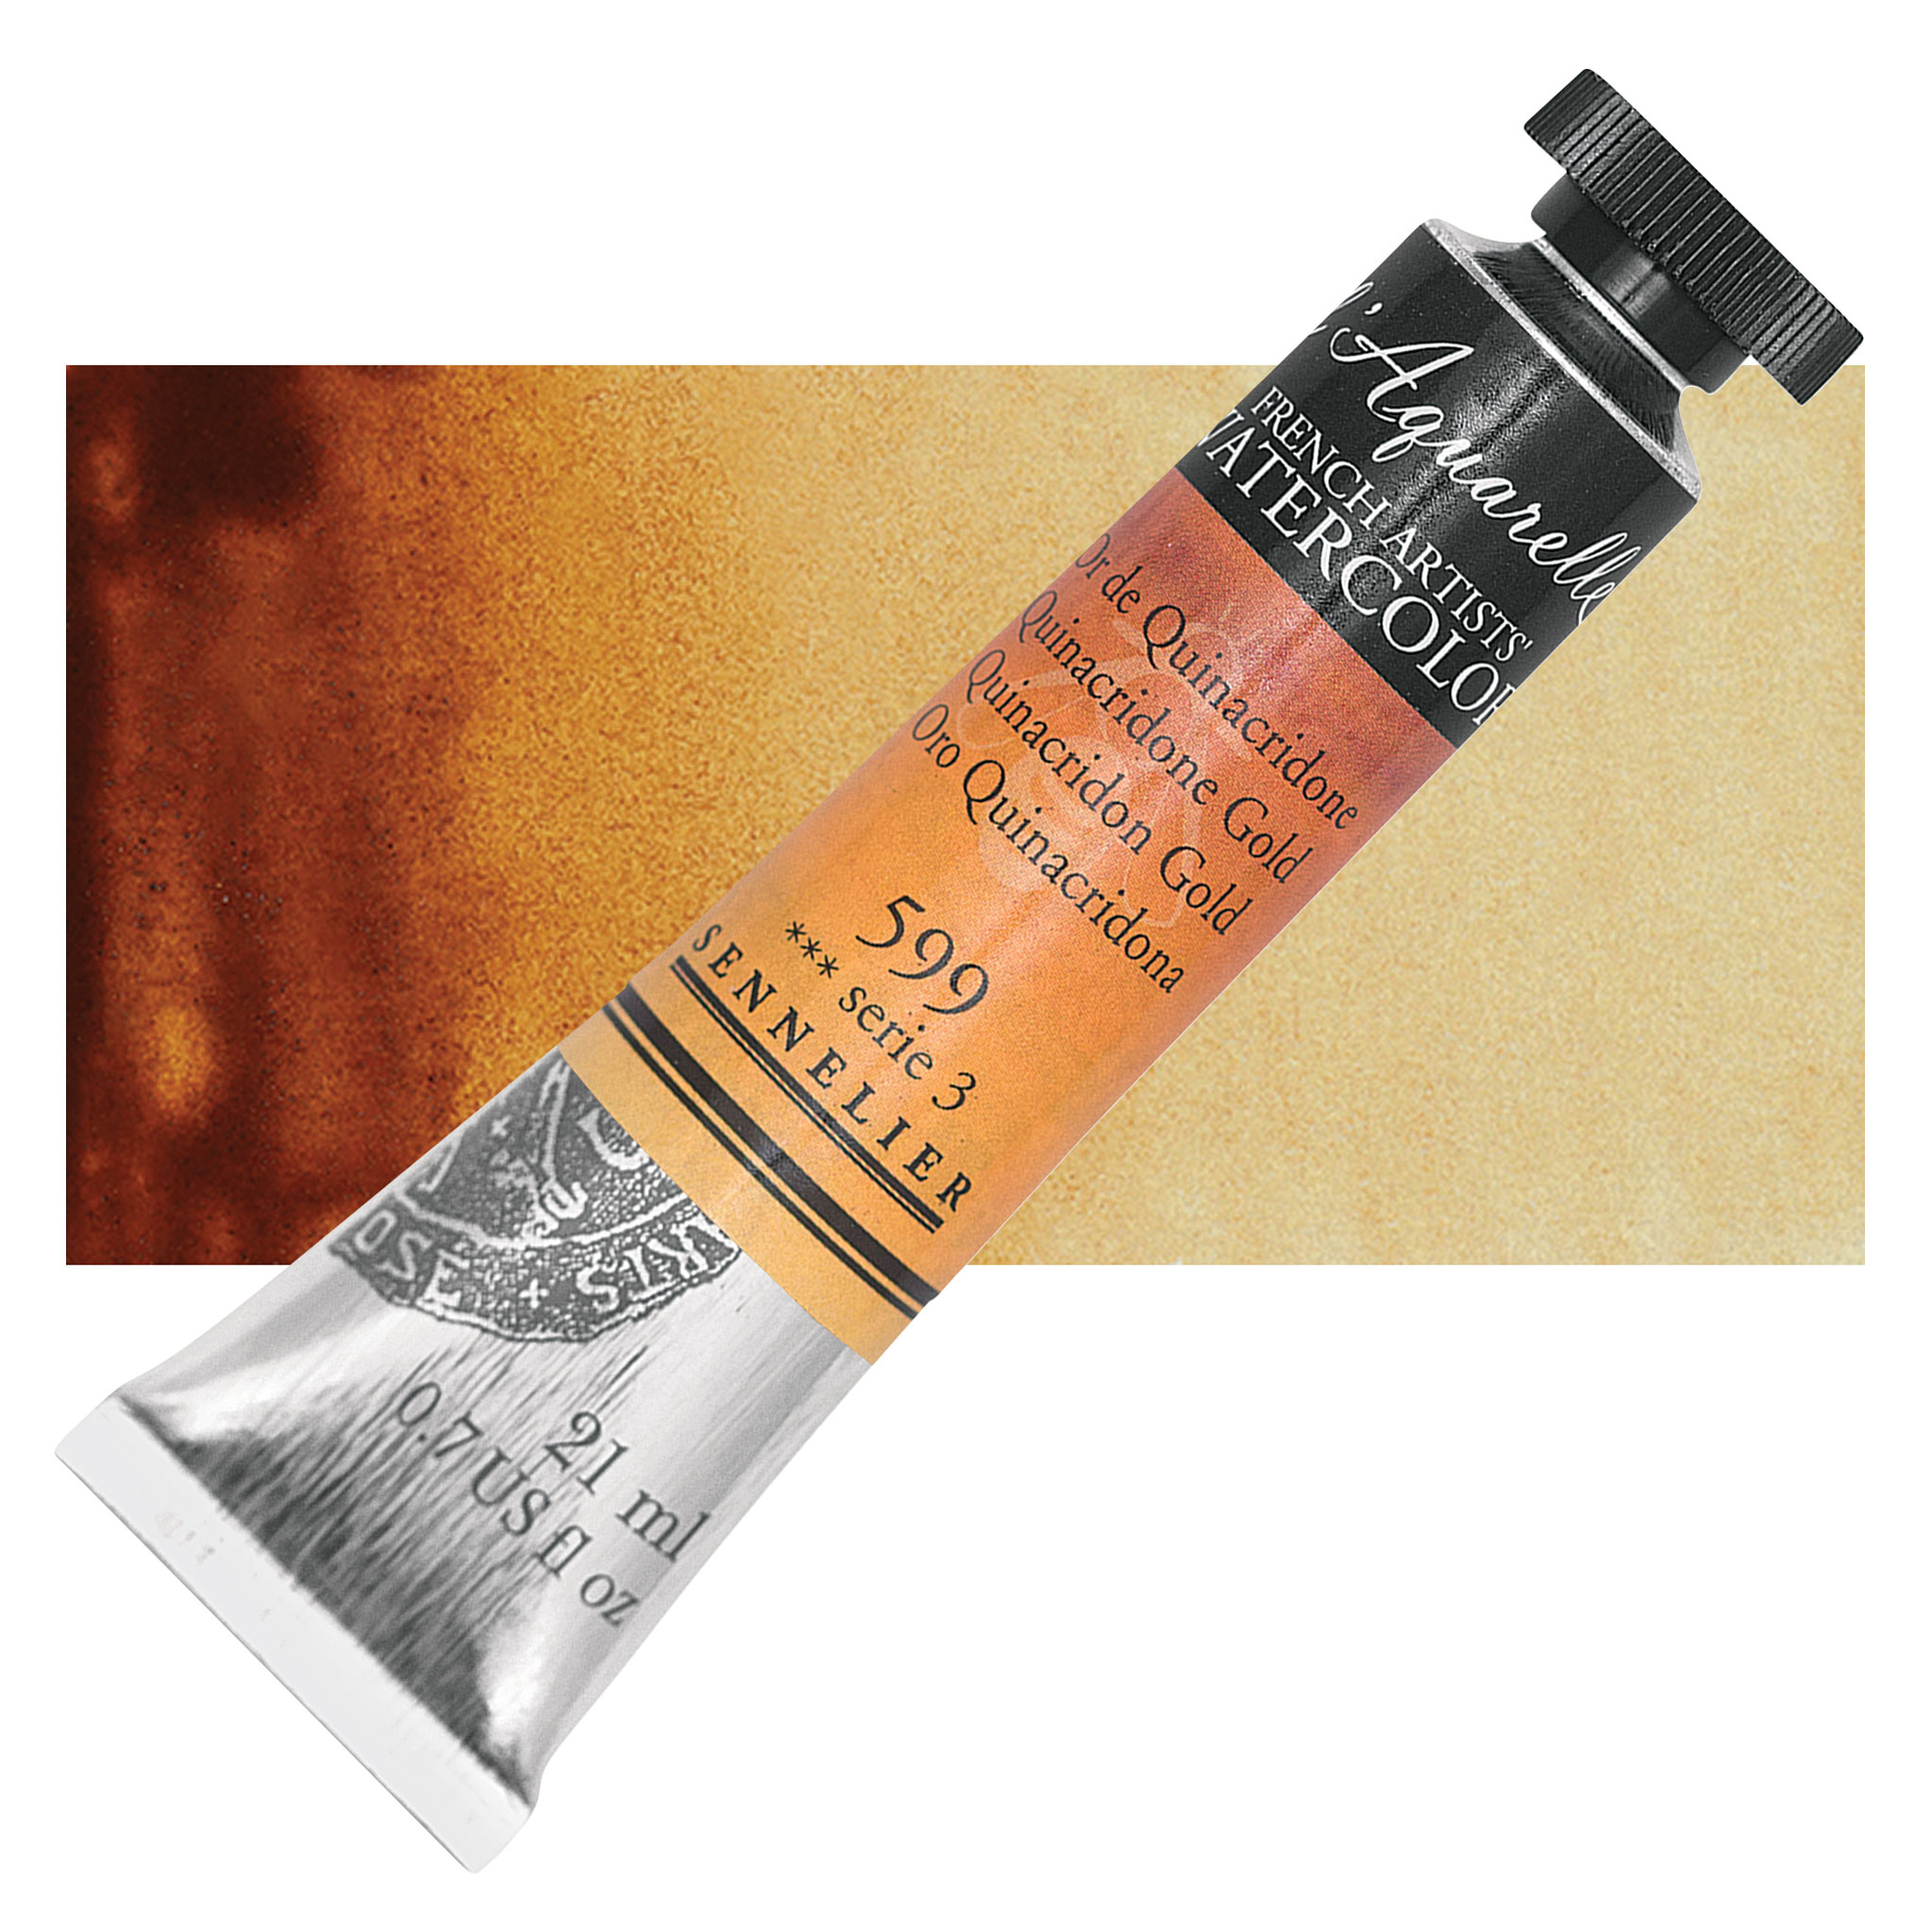 Sennelier French Artists' Watercolor - Chinese Orange 10 ml